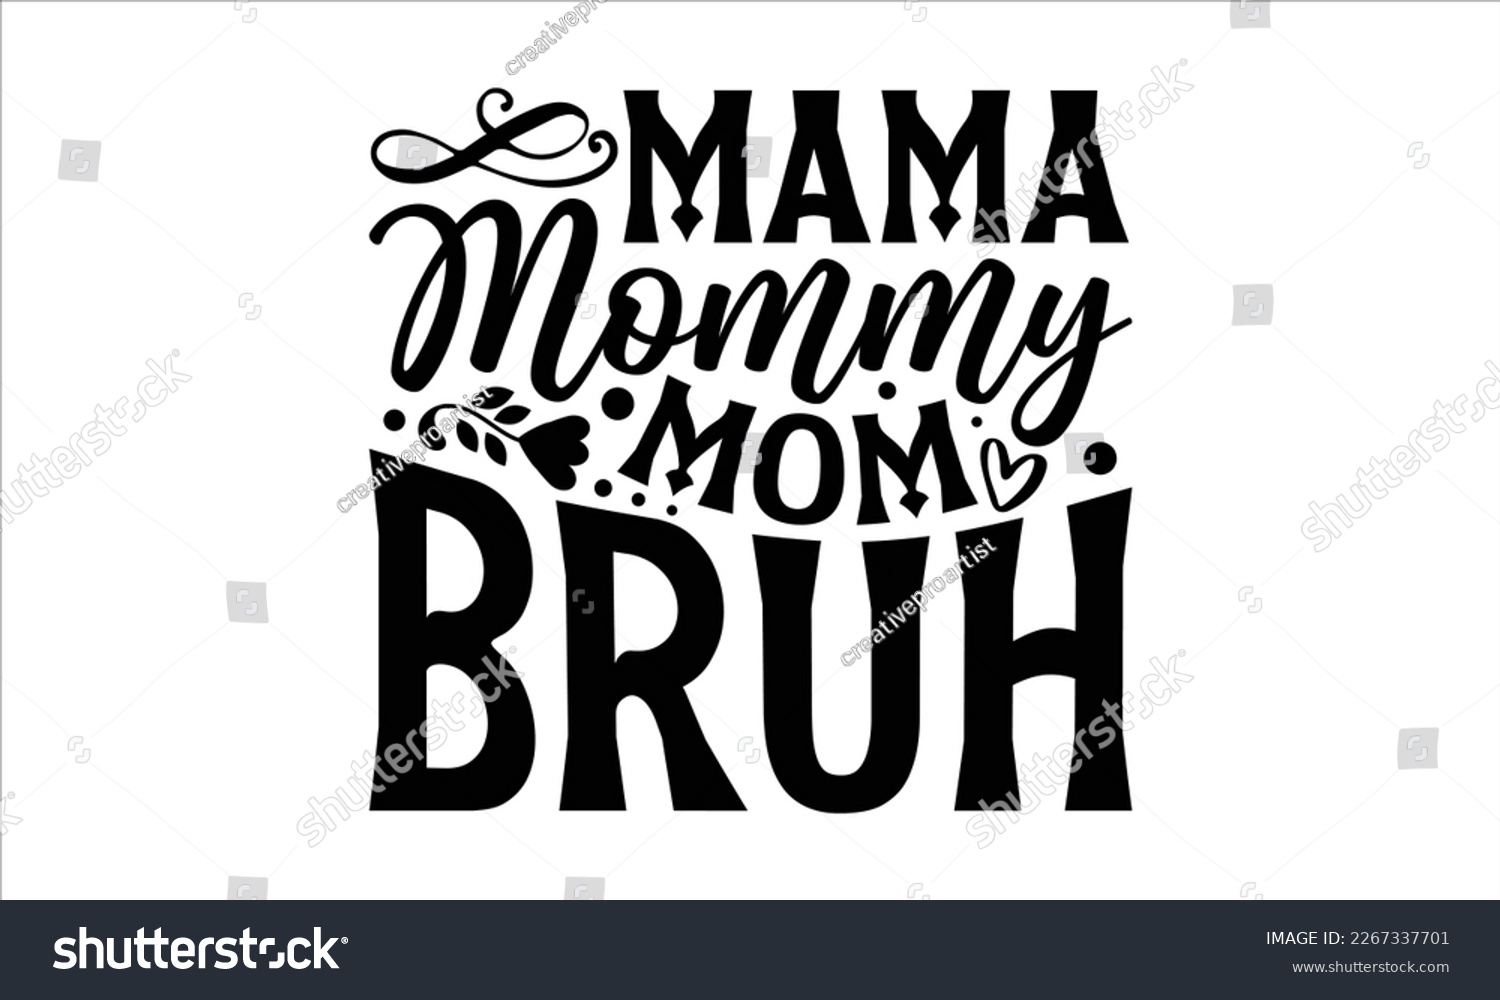 SVG of Mama mommy mom bruh- Mother's day t-shirt and svg design, Hand Drawn calligraphy Phrases, greeting cards, mugs, templates, posters, Handwritten Vector, EPS 10. svg